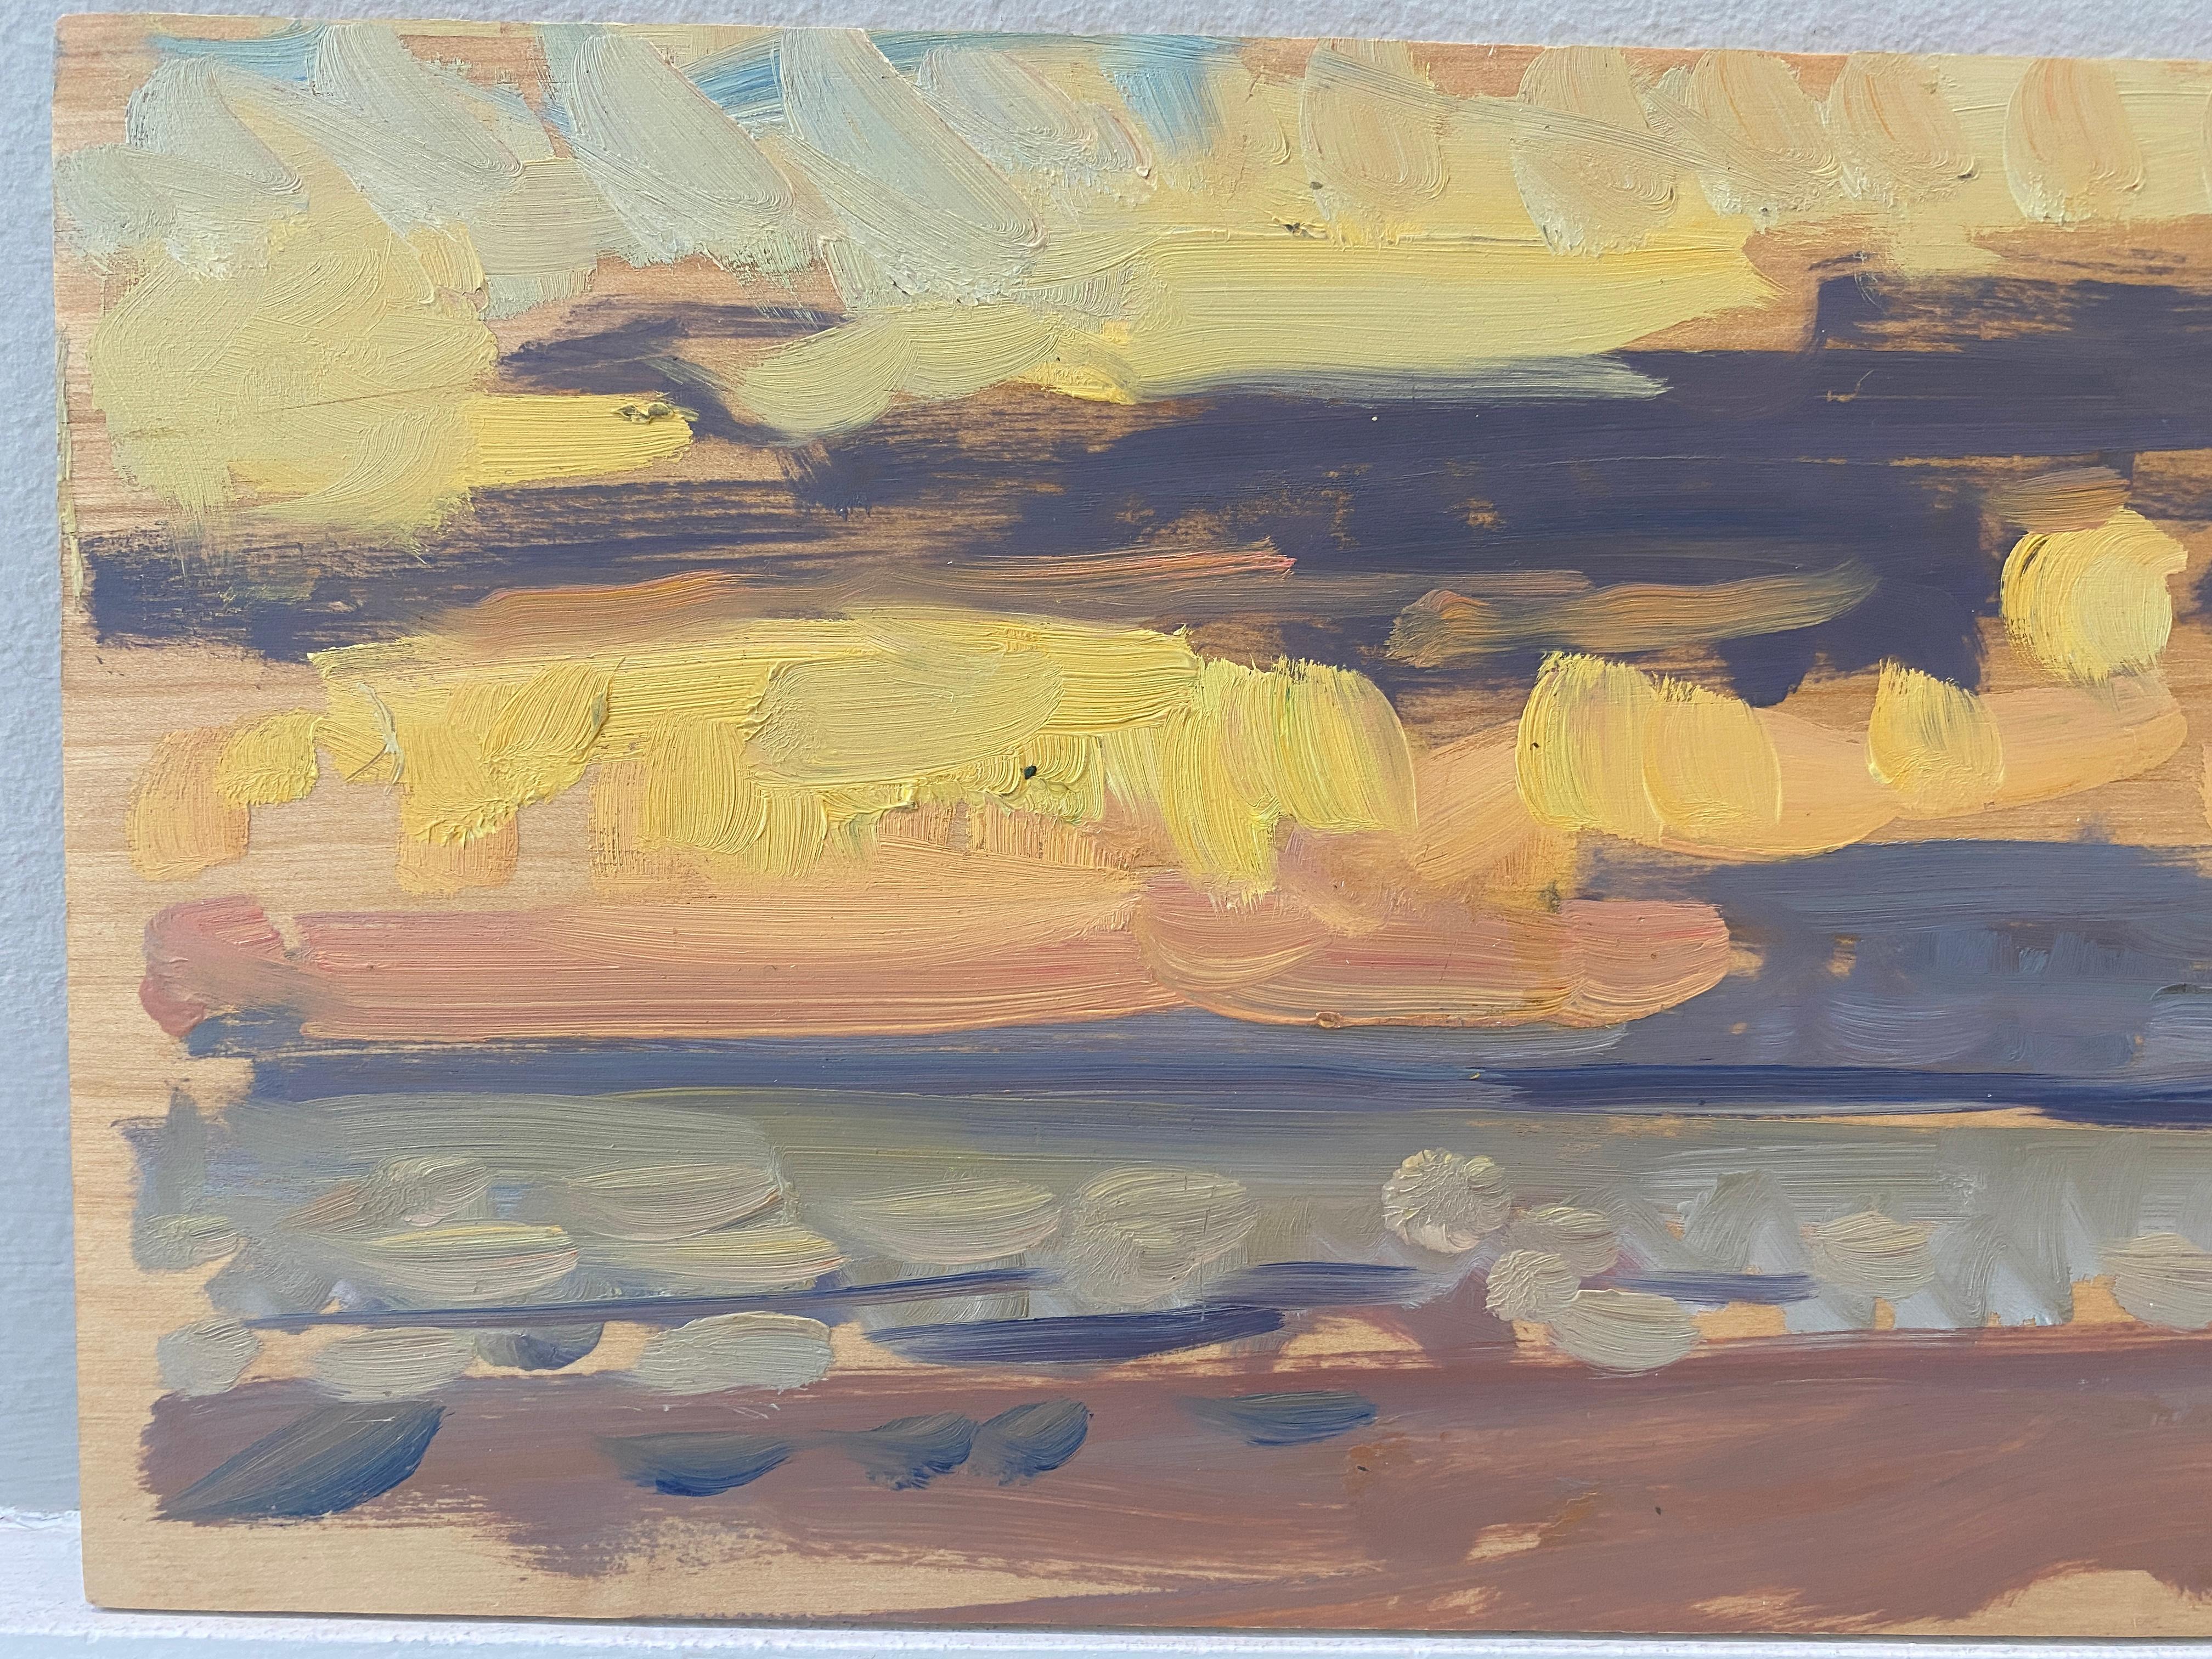 Long Beach Study - Brown Abstract Painting by Ben Fenske